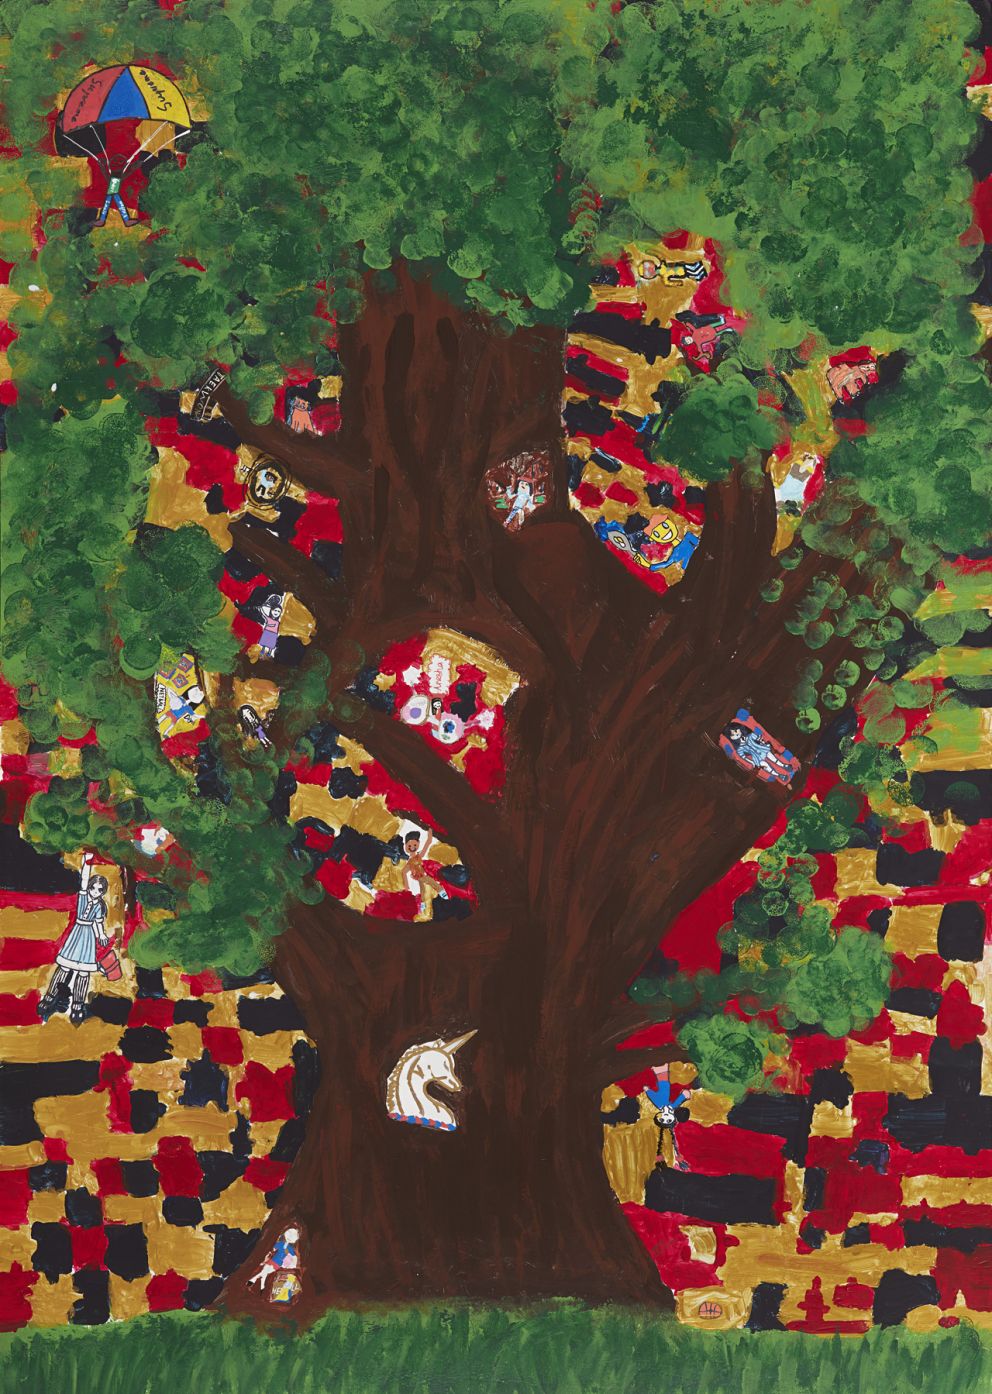 Artwork of large gumtree with puzzle pieces to represent the school